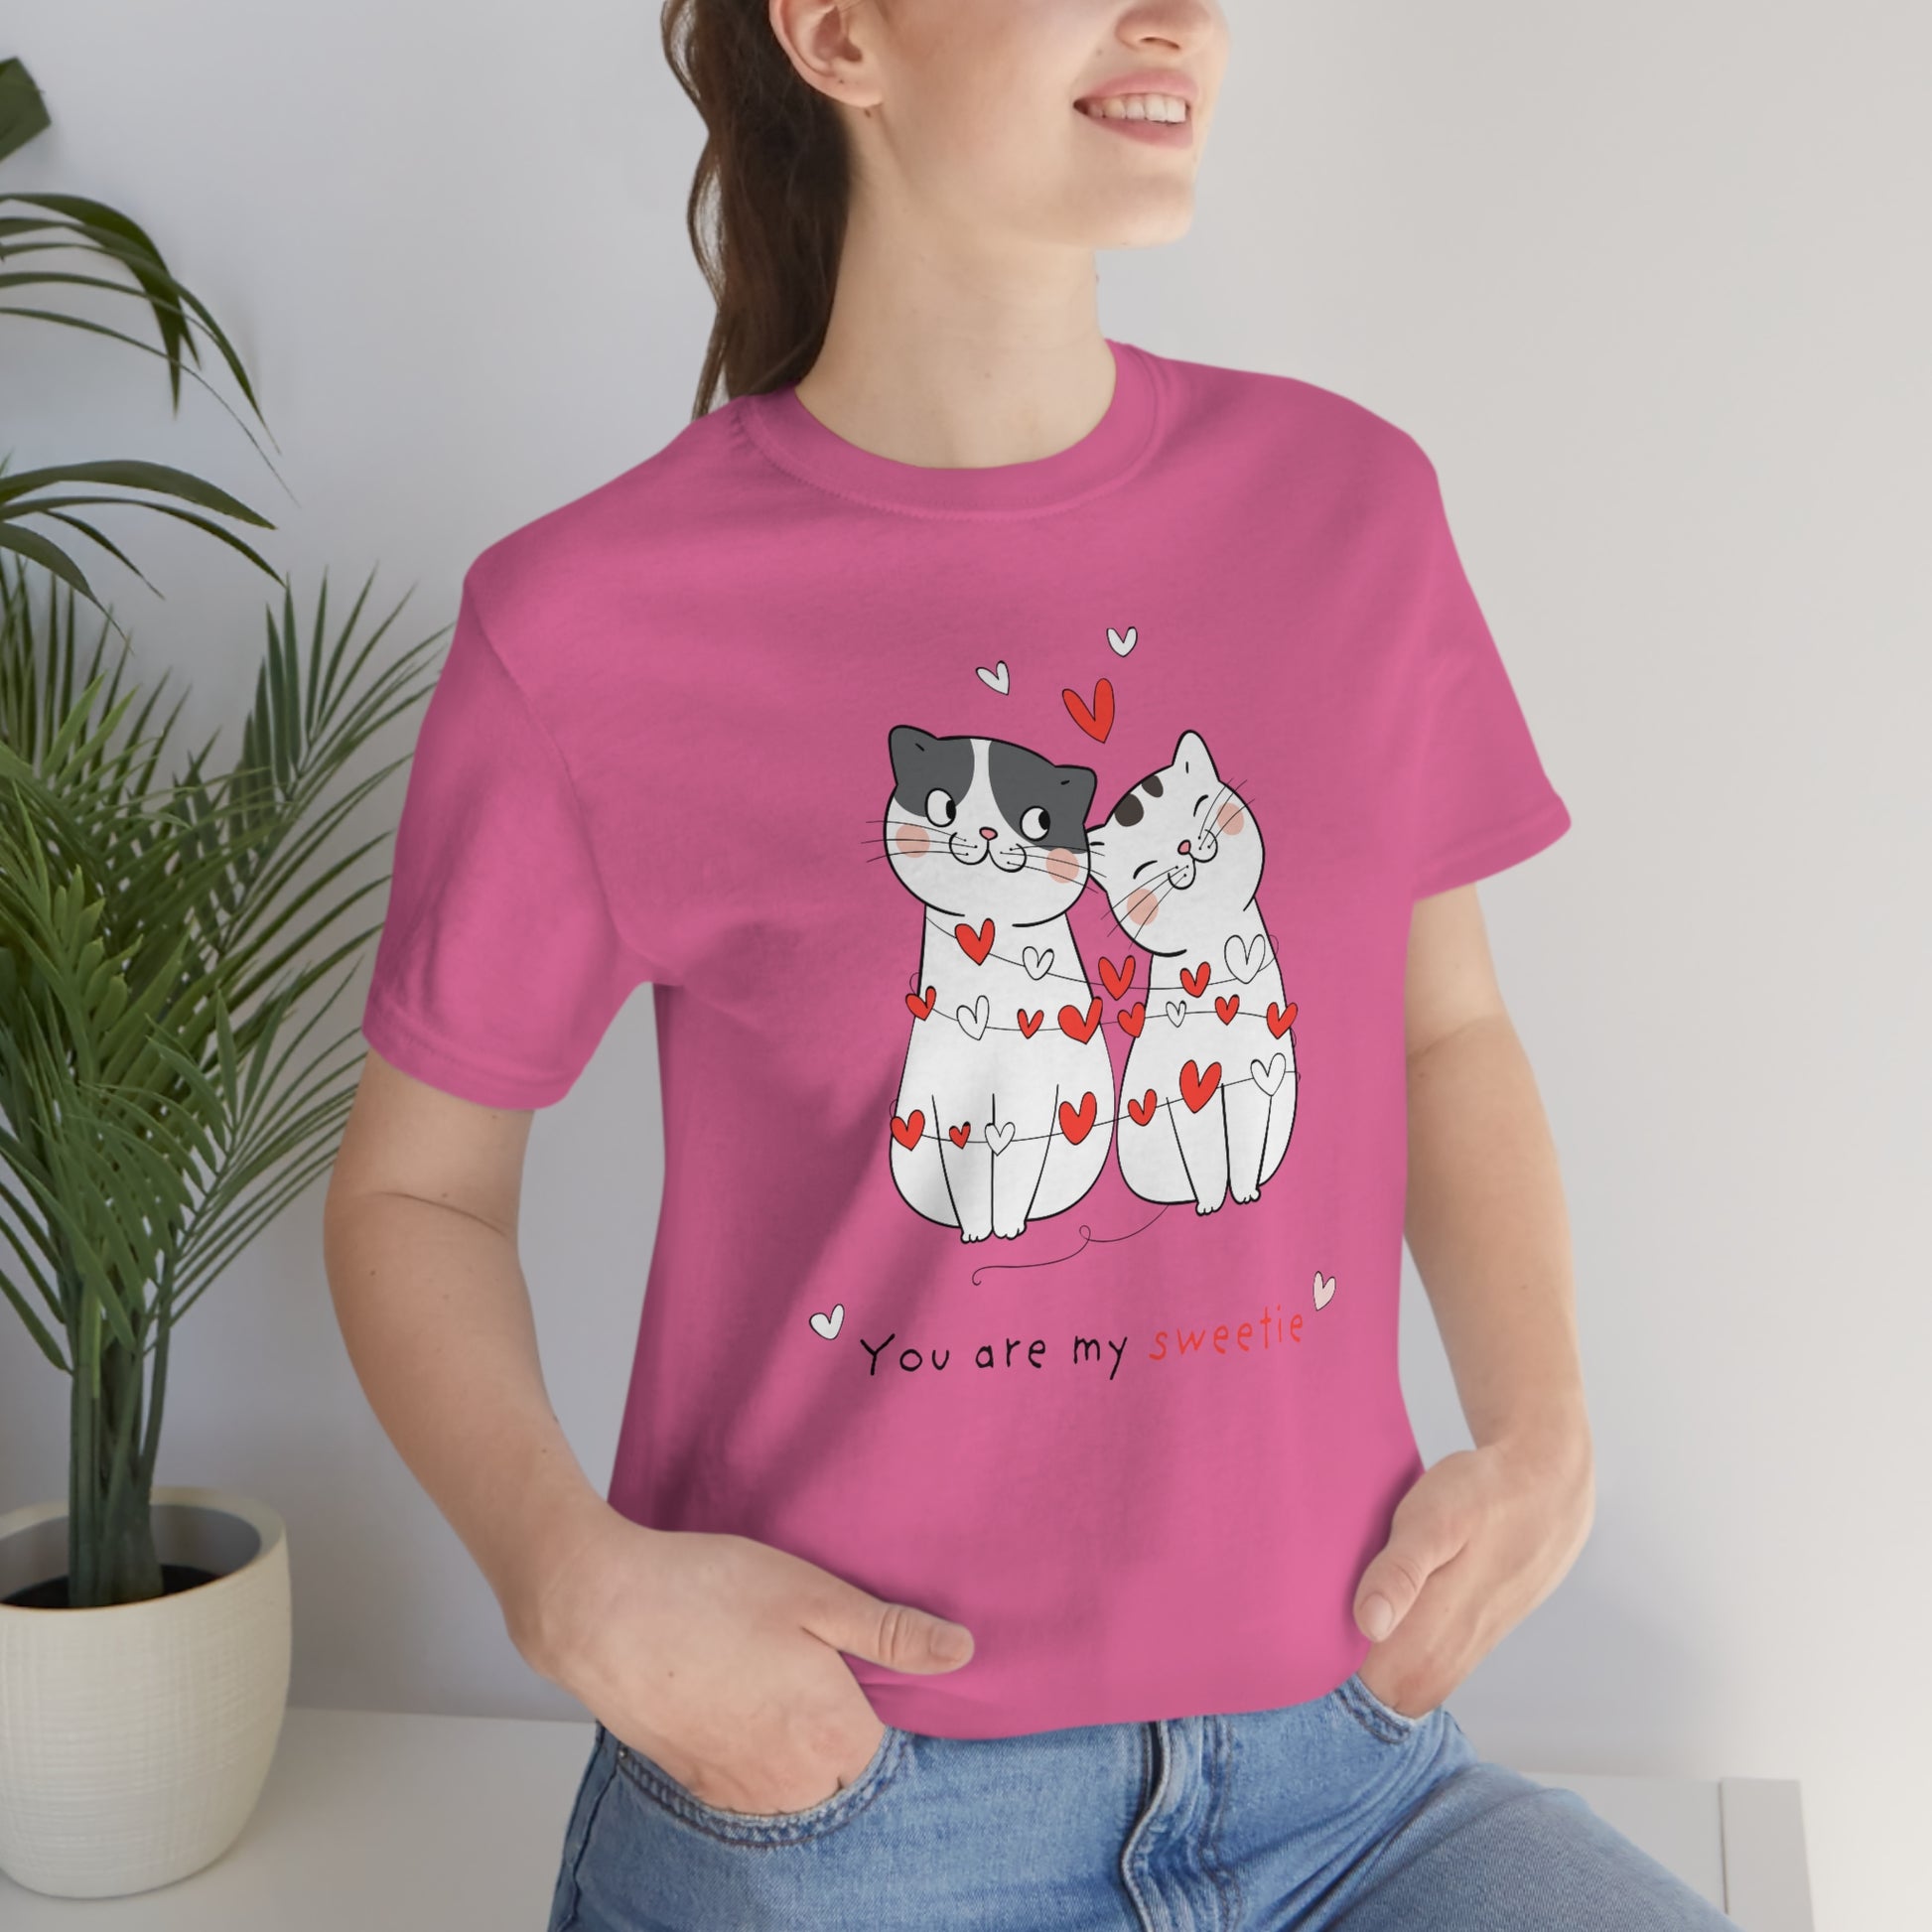 Cats Valentine's Day Tshirt, Hearts Love Sweety Kittens Unisex Women Adult Aesthetic Graphic Crewneck Tee Shirt Her Top Starcove Fashion